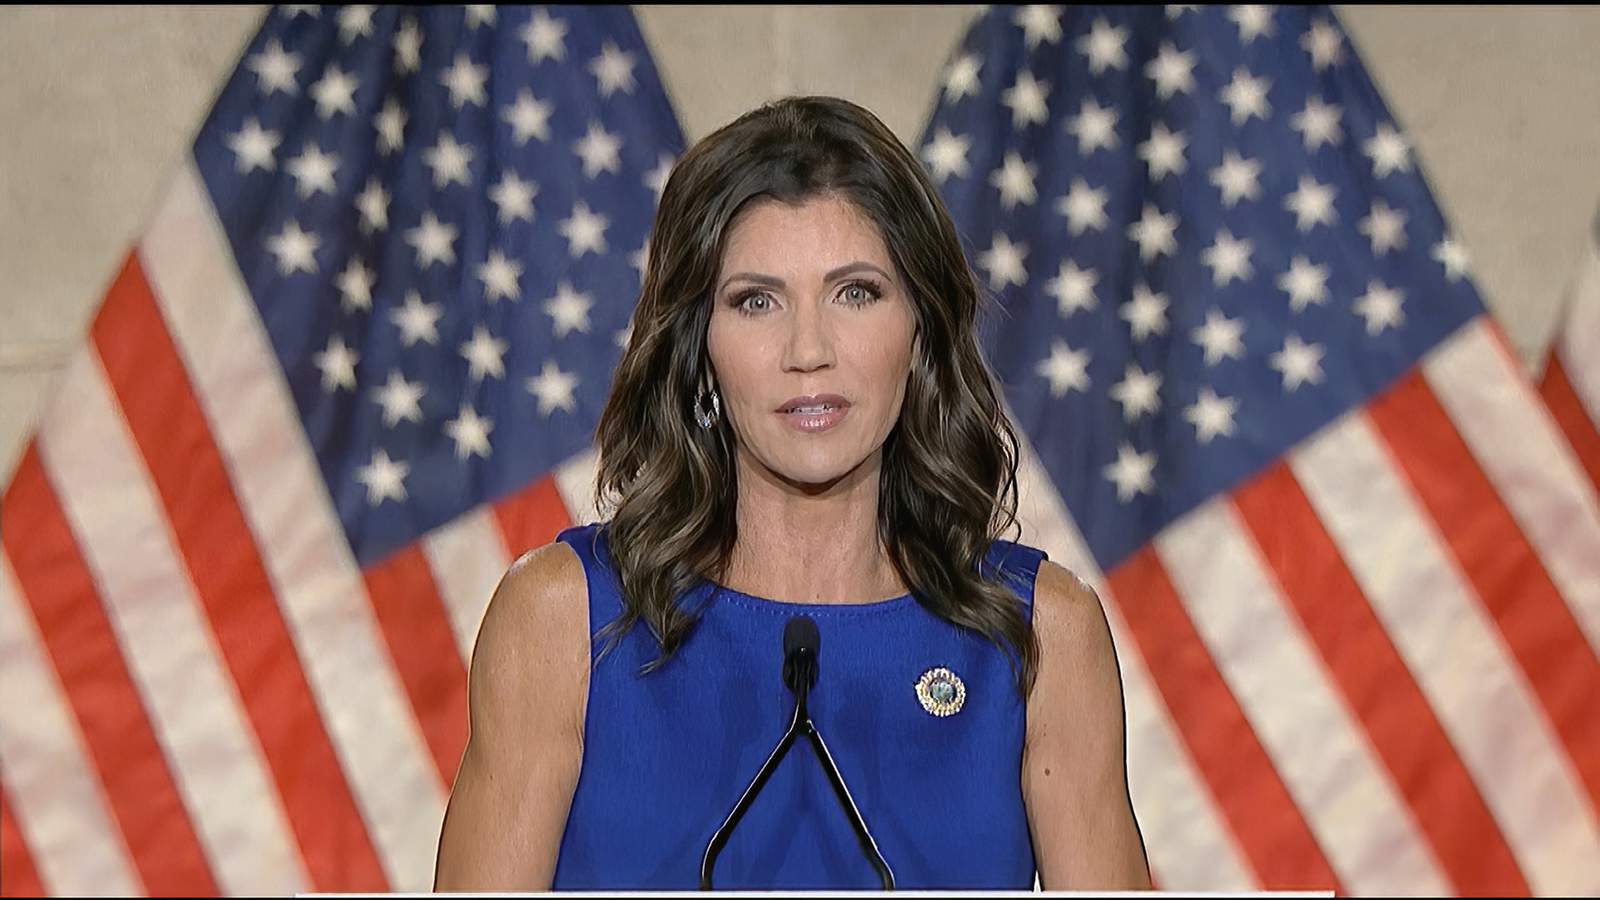 Noem's pitch to aid Trump seems to benefit own campaign fund